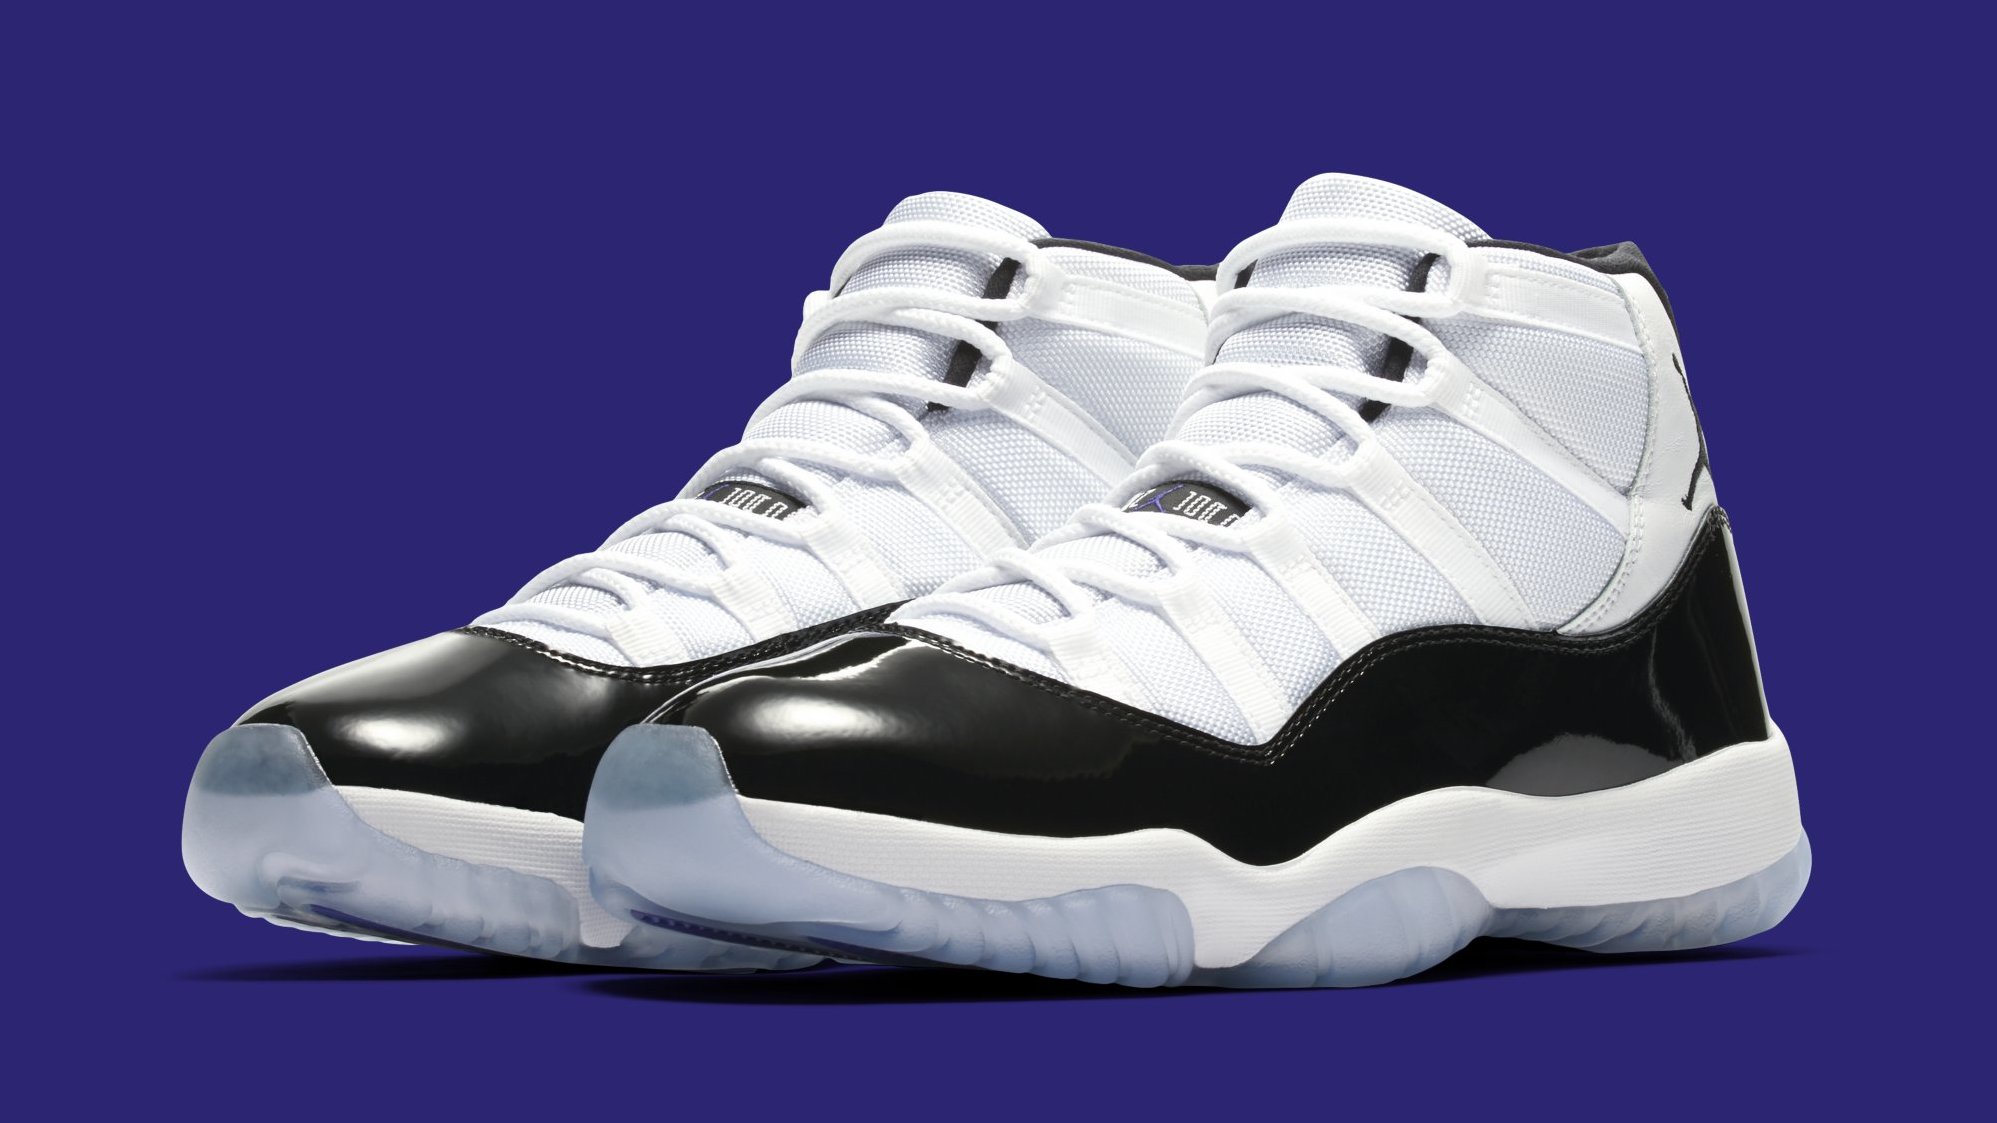 Concord' Air Jordan 11 Returning In 2018 378037-100 | Sole Collector